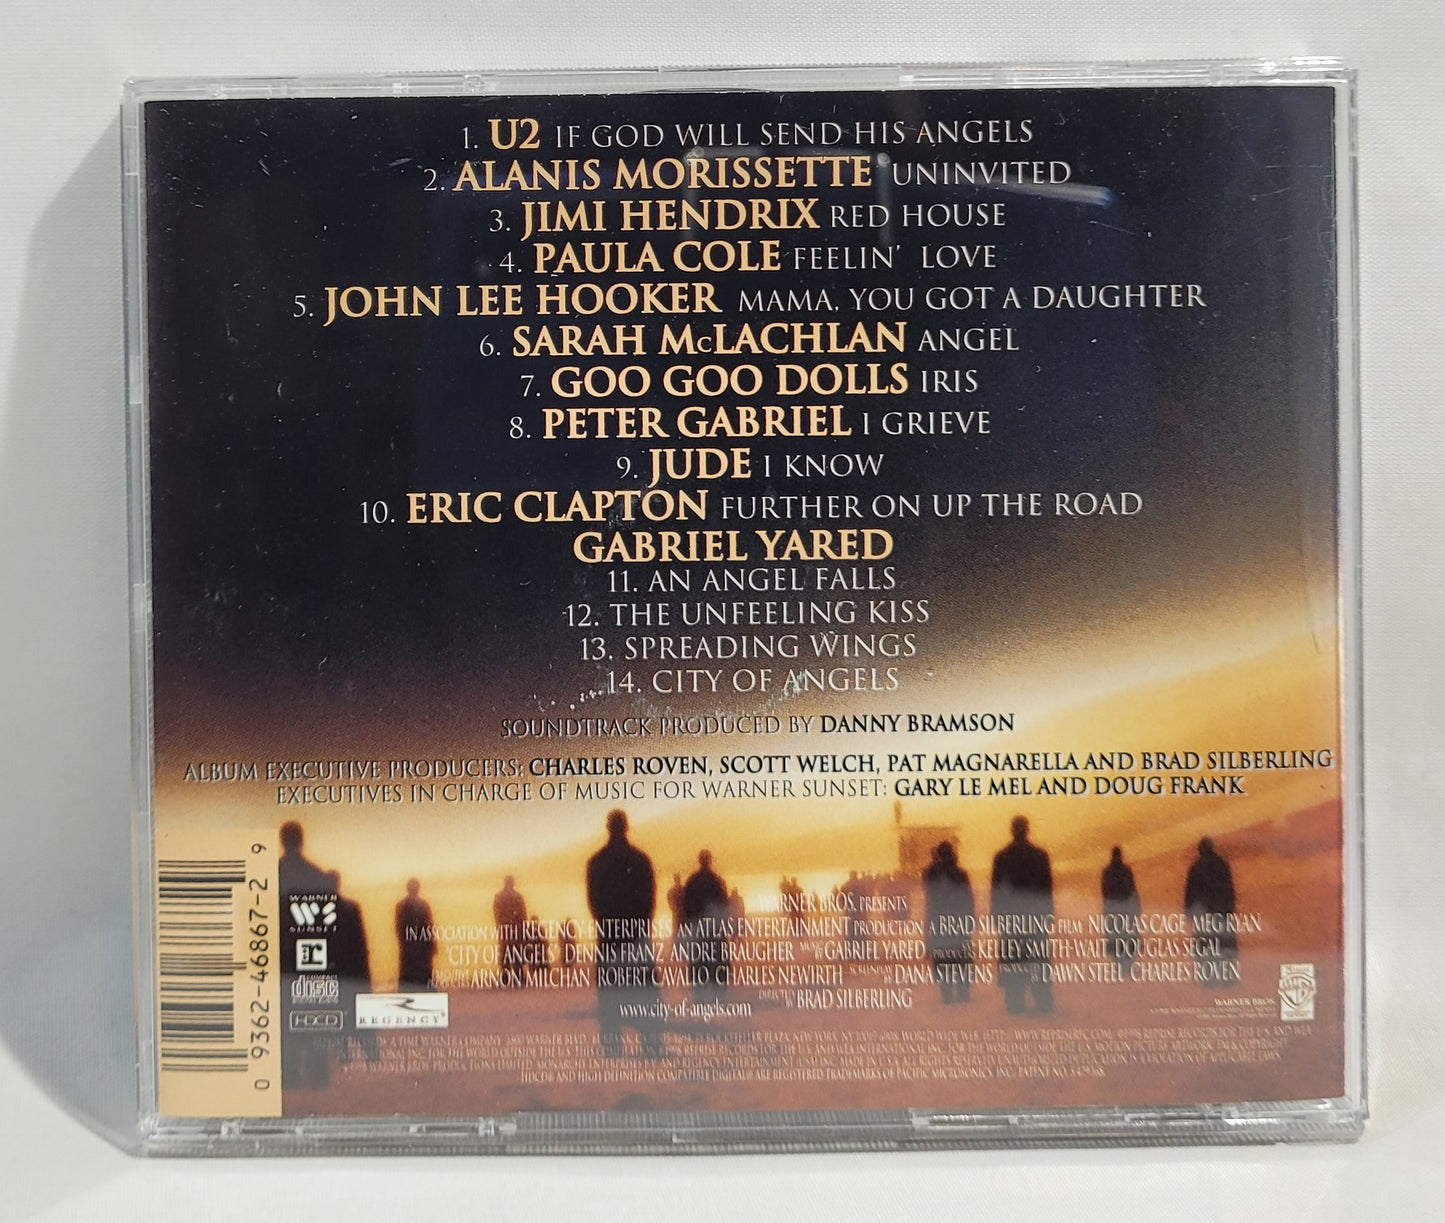 Soundtrack - City of Angels (Music From the Motion Picture) [HDCD]